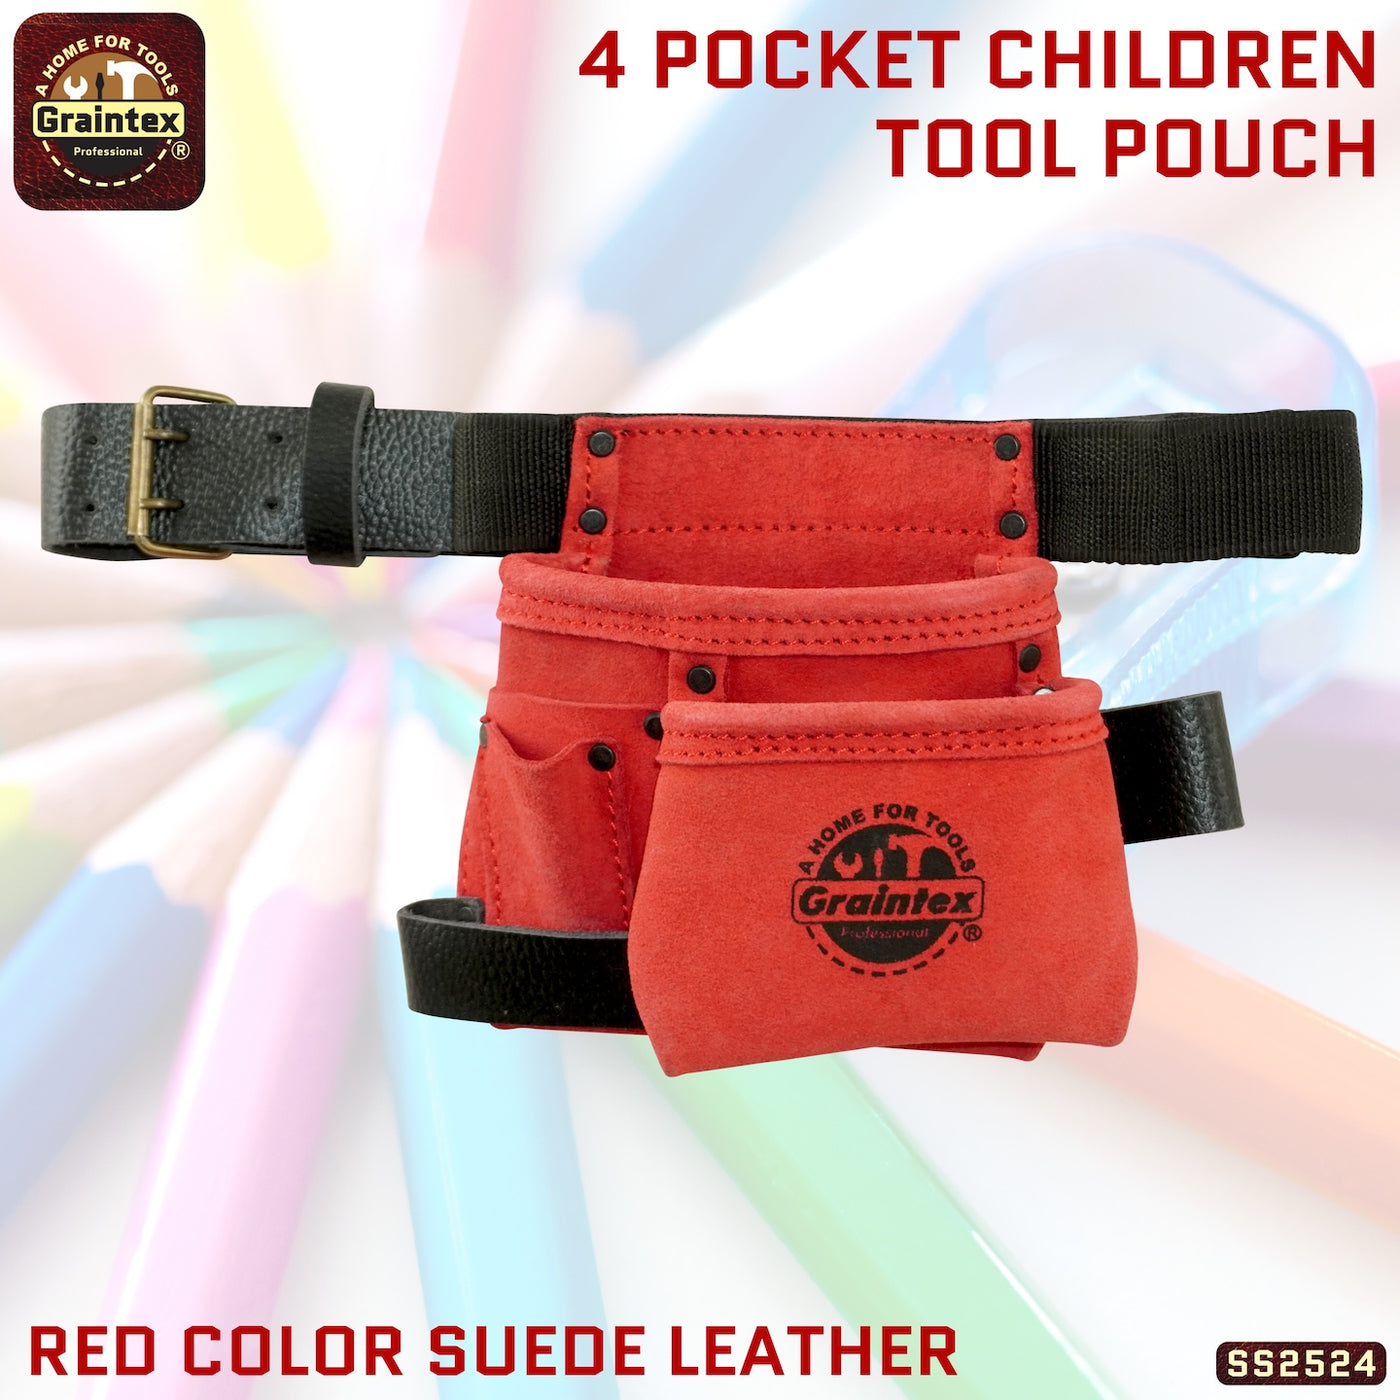 SS2524 :: 4 Pocket Children Tool Pouch Red Color Suede Leather